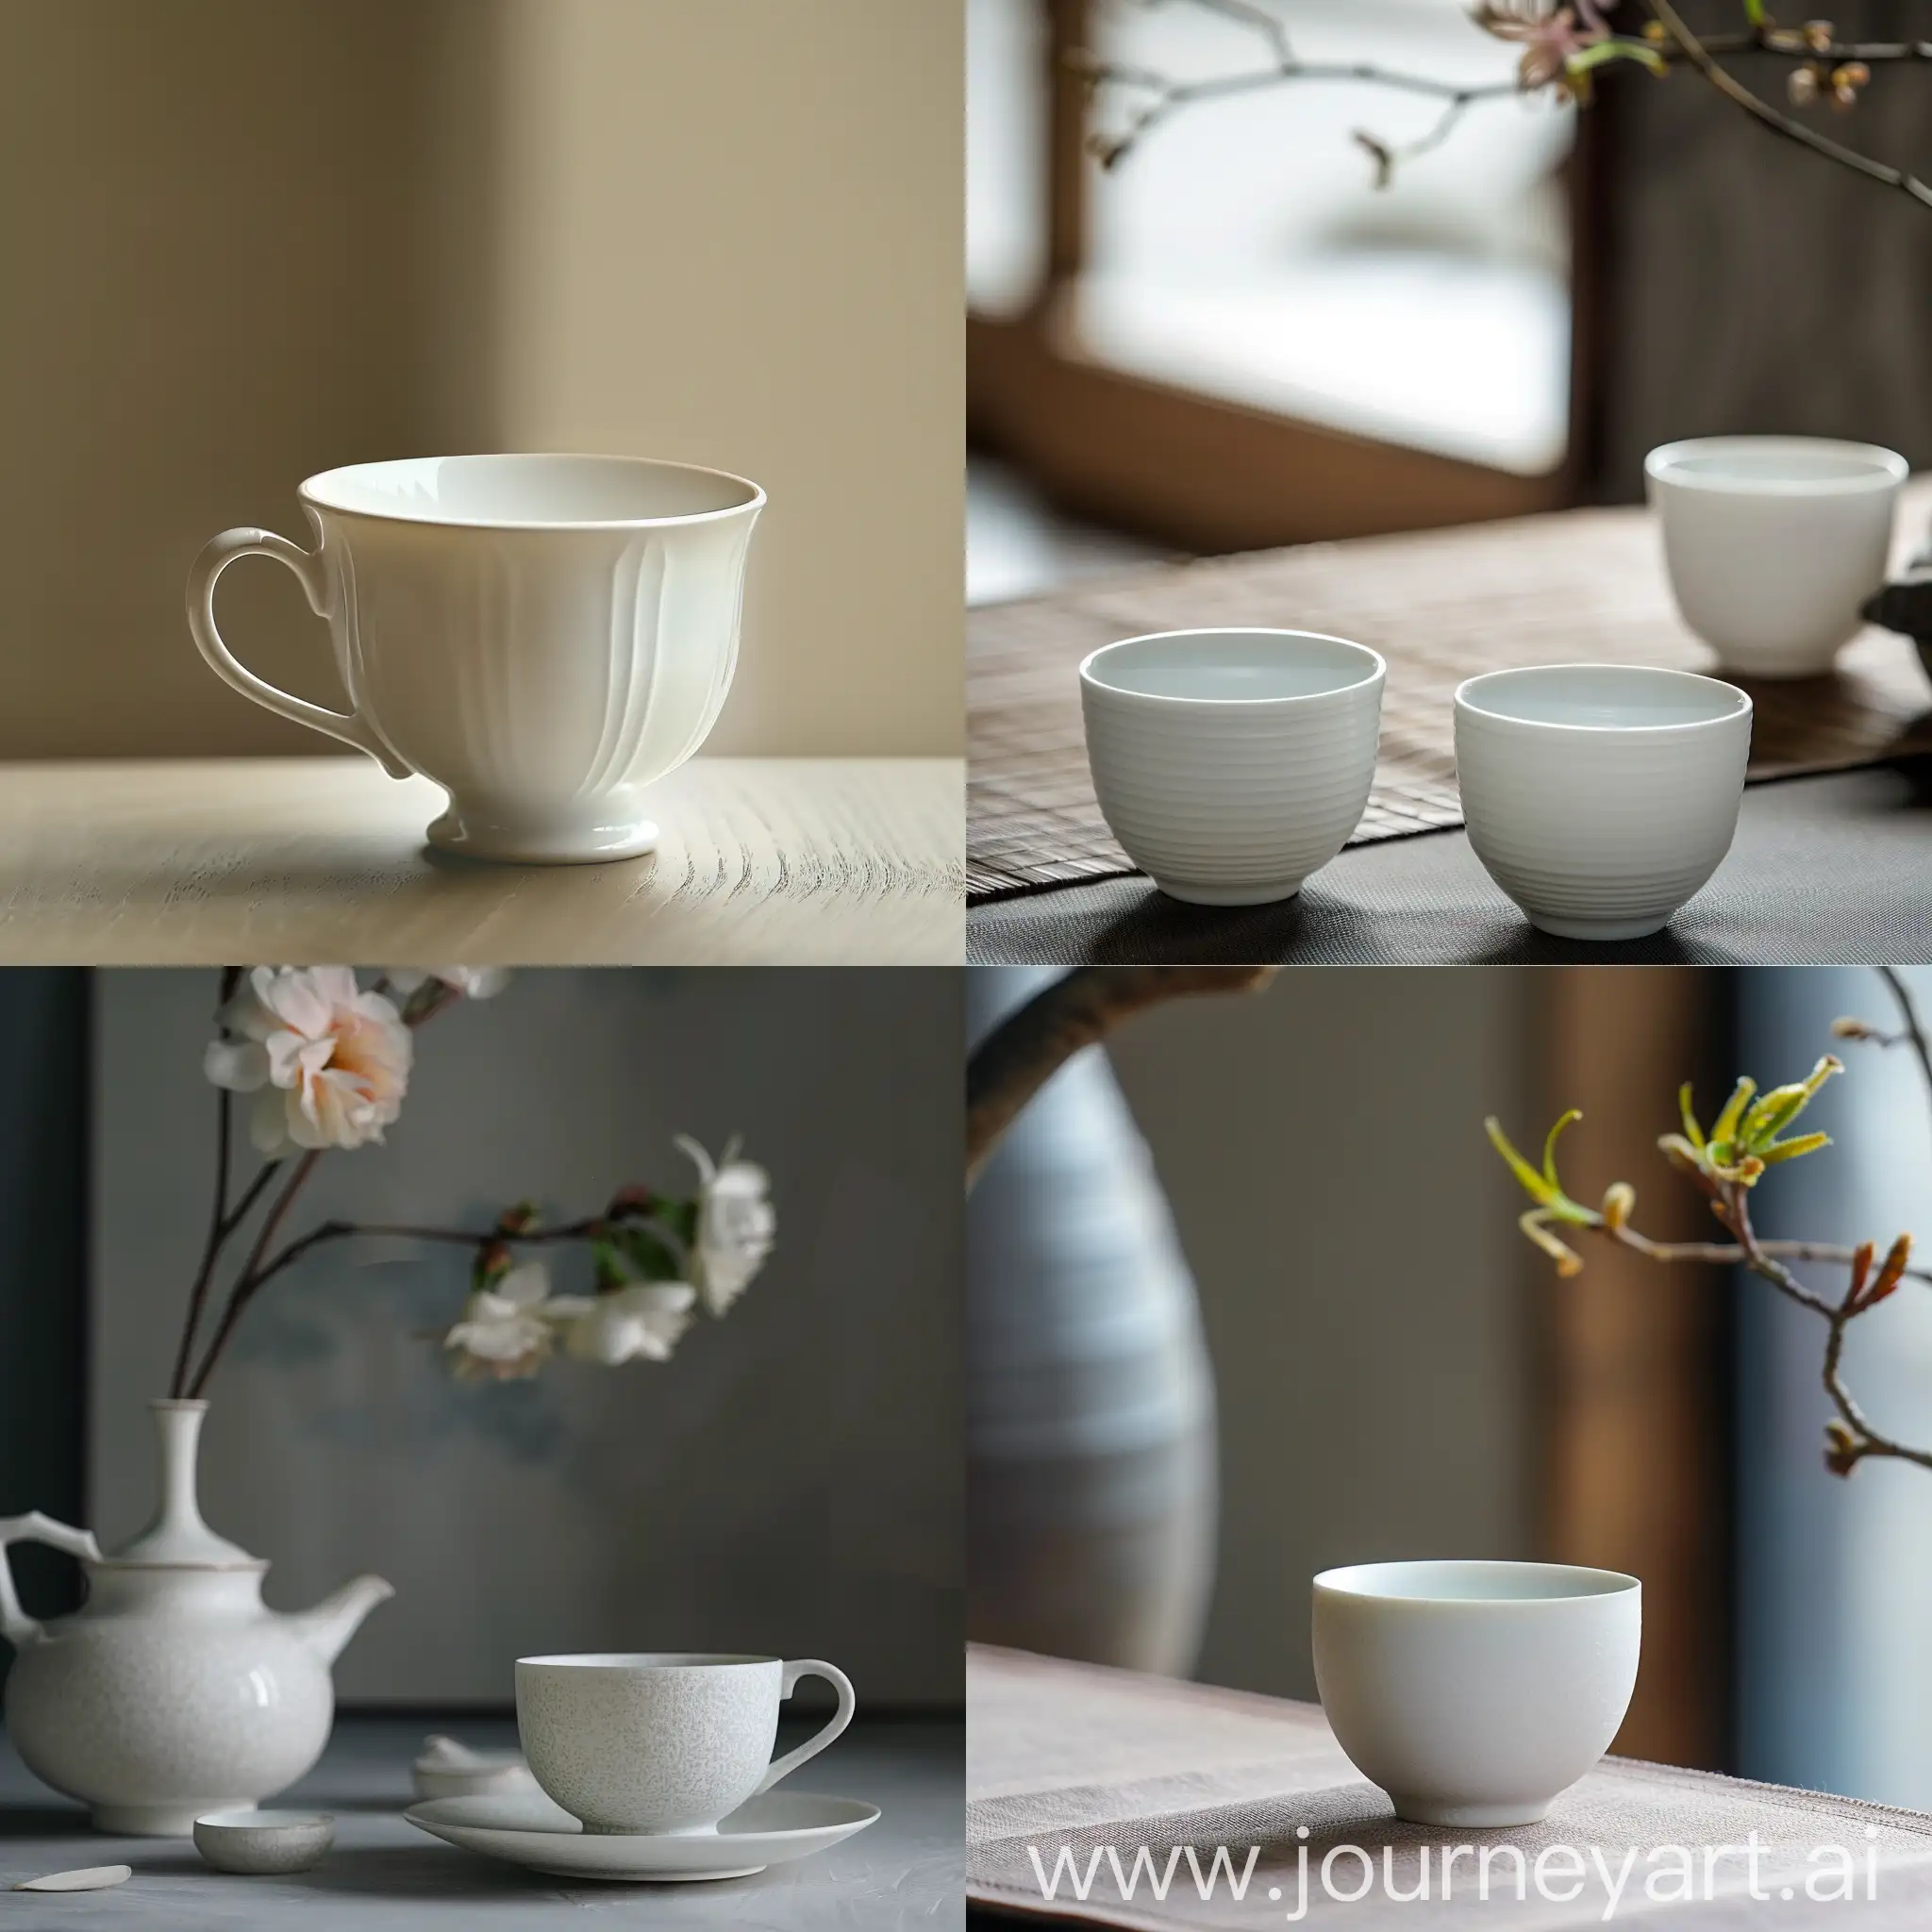 Clean edge textured white tea cup, a Chinese porcelain tea cup placed on the table, realistic